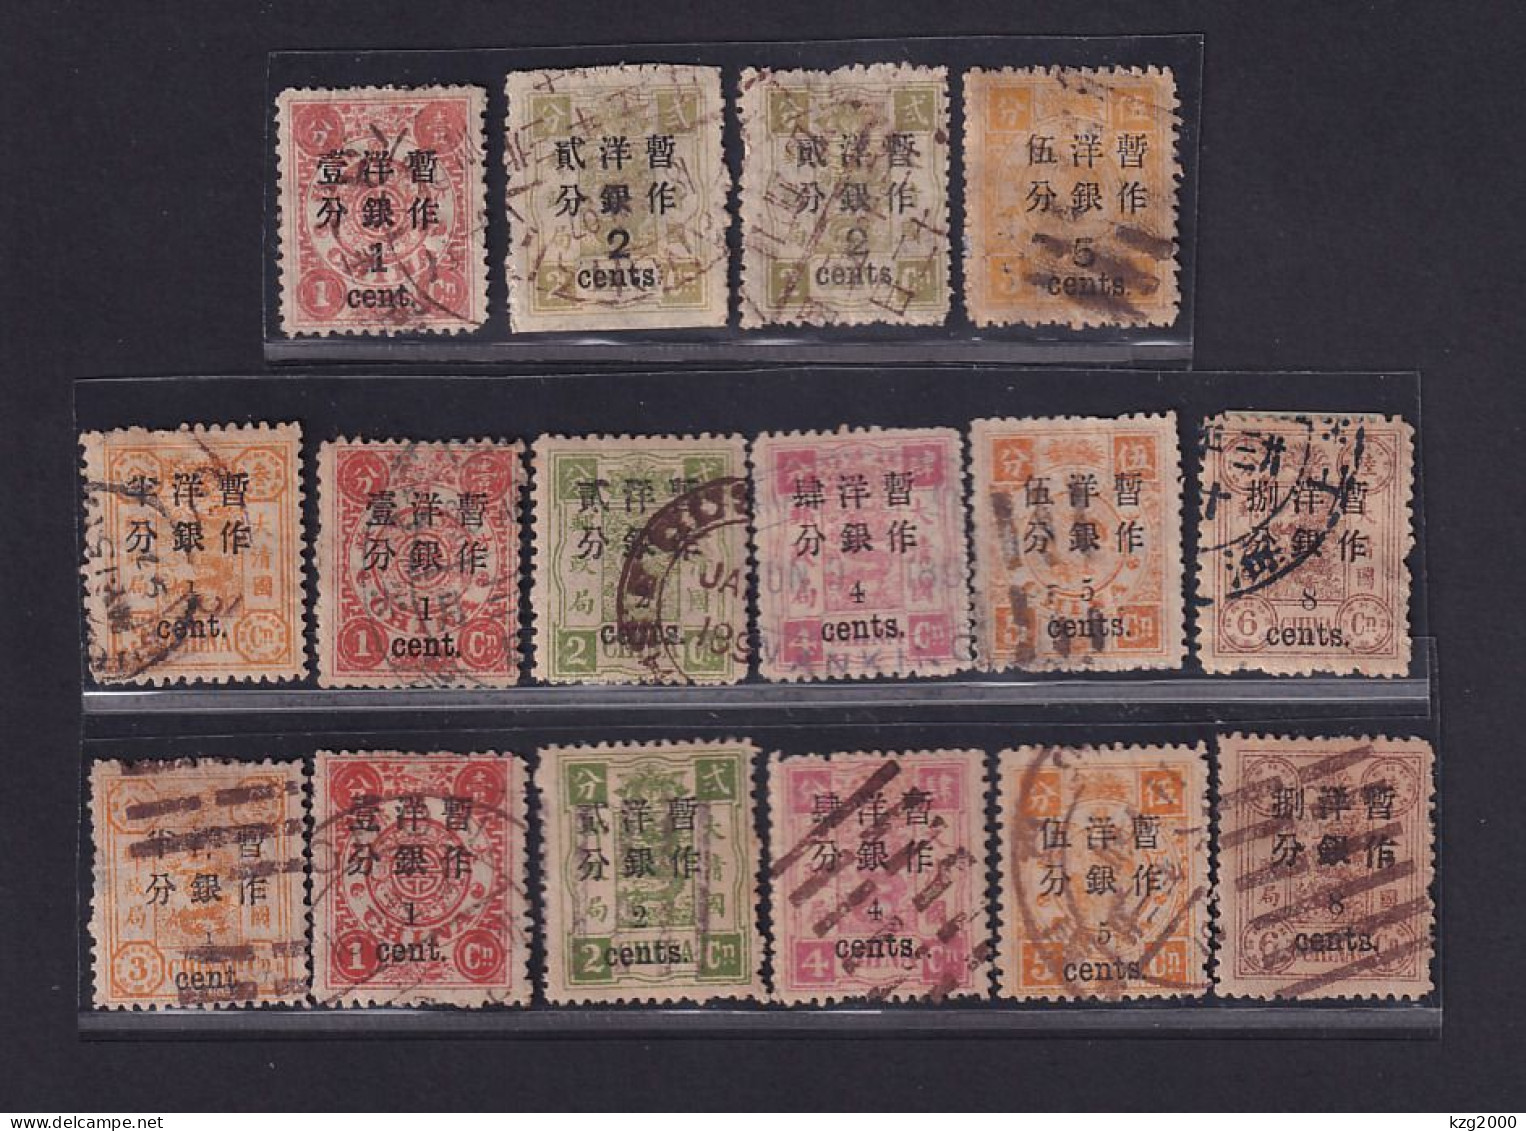 Qing Dynasty China Stamp 1897 Cixi‘s Birthday Commemorative Surcharged 16 Used Stamps - Gebruikt